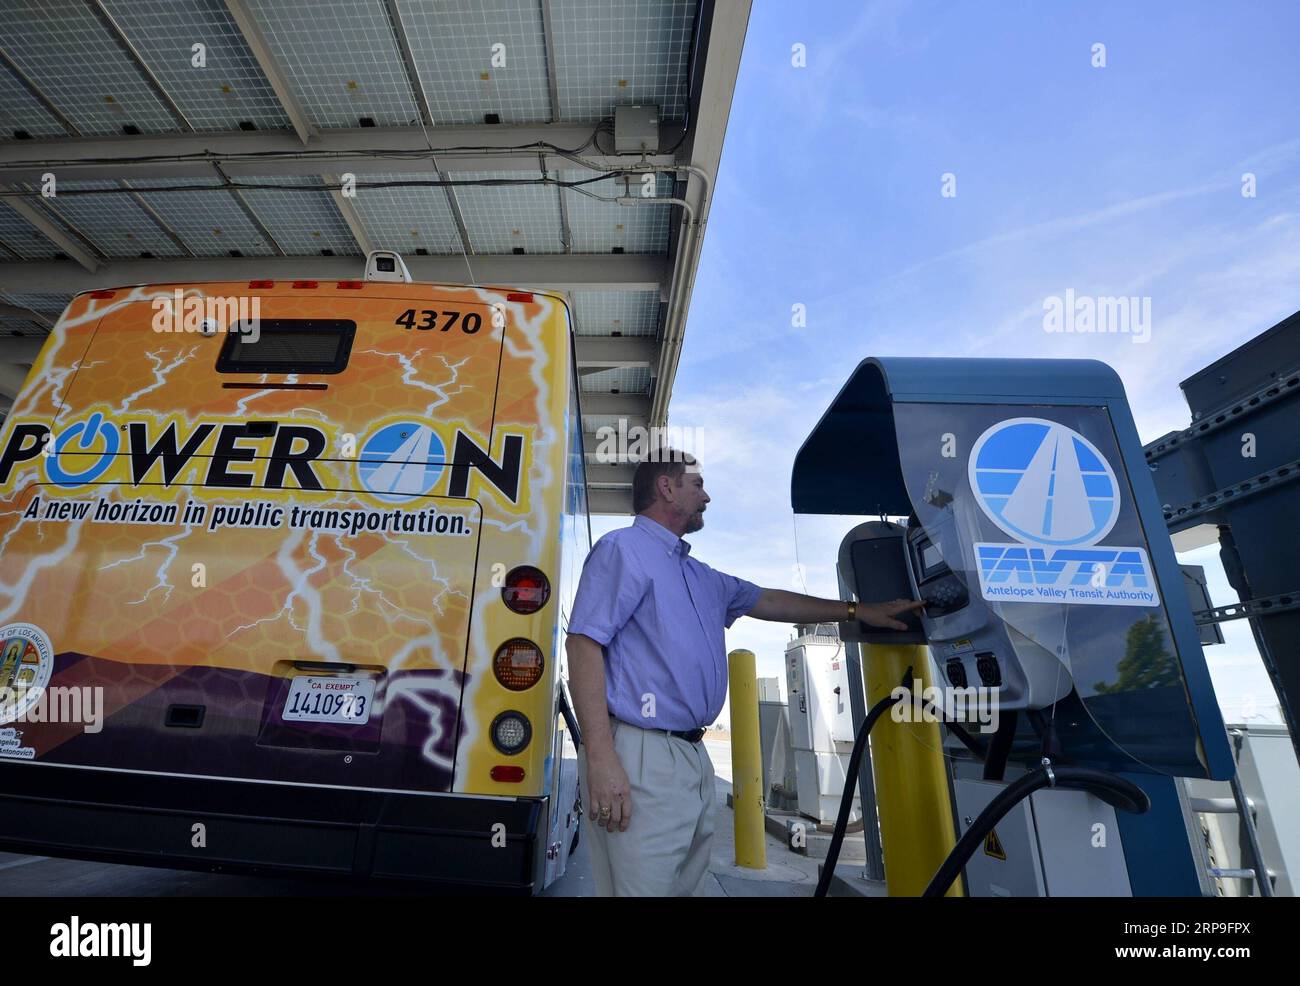 (190405) -- NEW YORK, April 5, 2019 (Xinhua) -- File photo taken on April 29, 2015 shows a staff member of Antelope Valley Transit Authority (AVTA) charging an electric bus of BYD in the city of Antelope Valley, California, the United States. The AVTA has ordered 85 electric buses from BYD, and 25 buses have been delivered up to now, according to the company. China s leading electric vehicle maker BYD held a ceremony on April 3 to celebrate its 300th bus at its Lancaster manufacturing plant in the U.S. state of California, marking a milestone for production. The 300th bus, a 35-foot BYD K9S mo Stock Photo